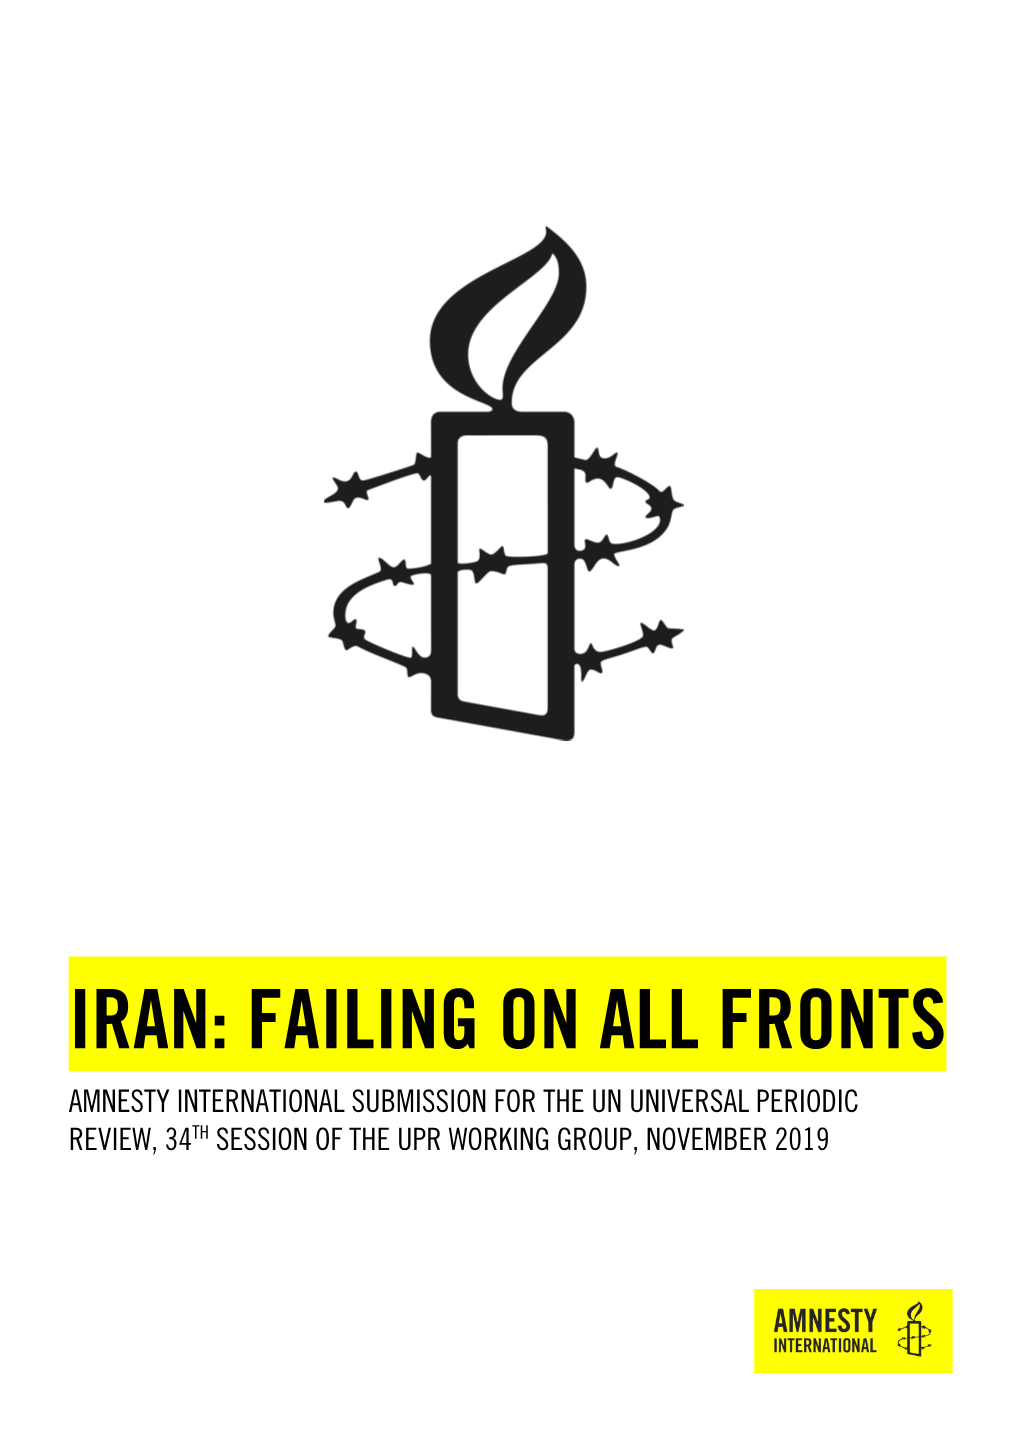 Iran: Failing on All Fronts Amnesty International Submission for the Un Universal Periodic Review, 34Th Session of the Upr Working Group, November 2019